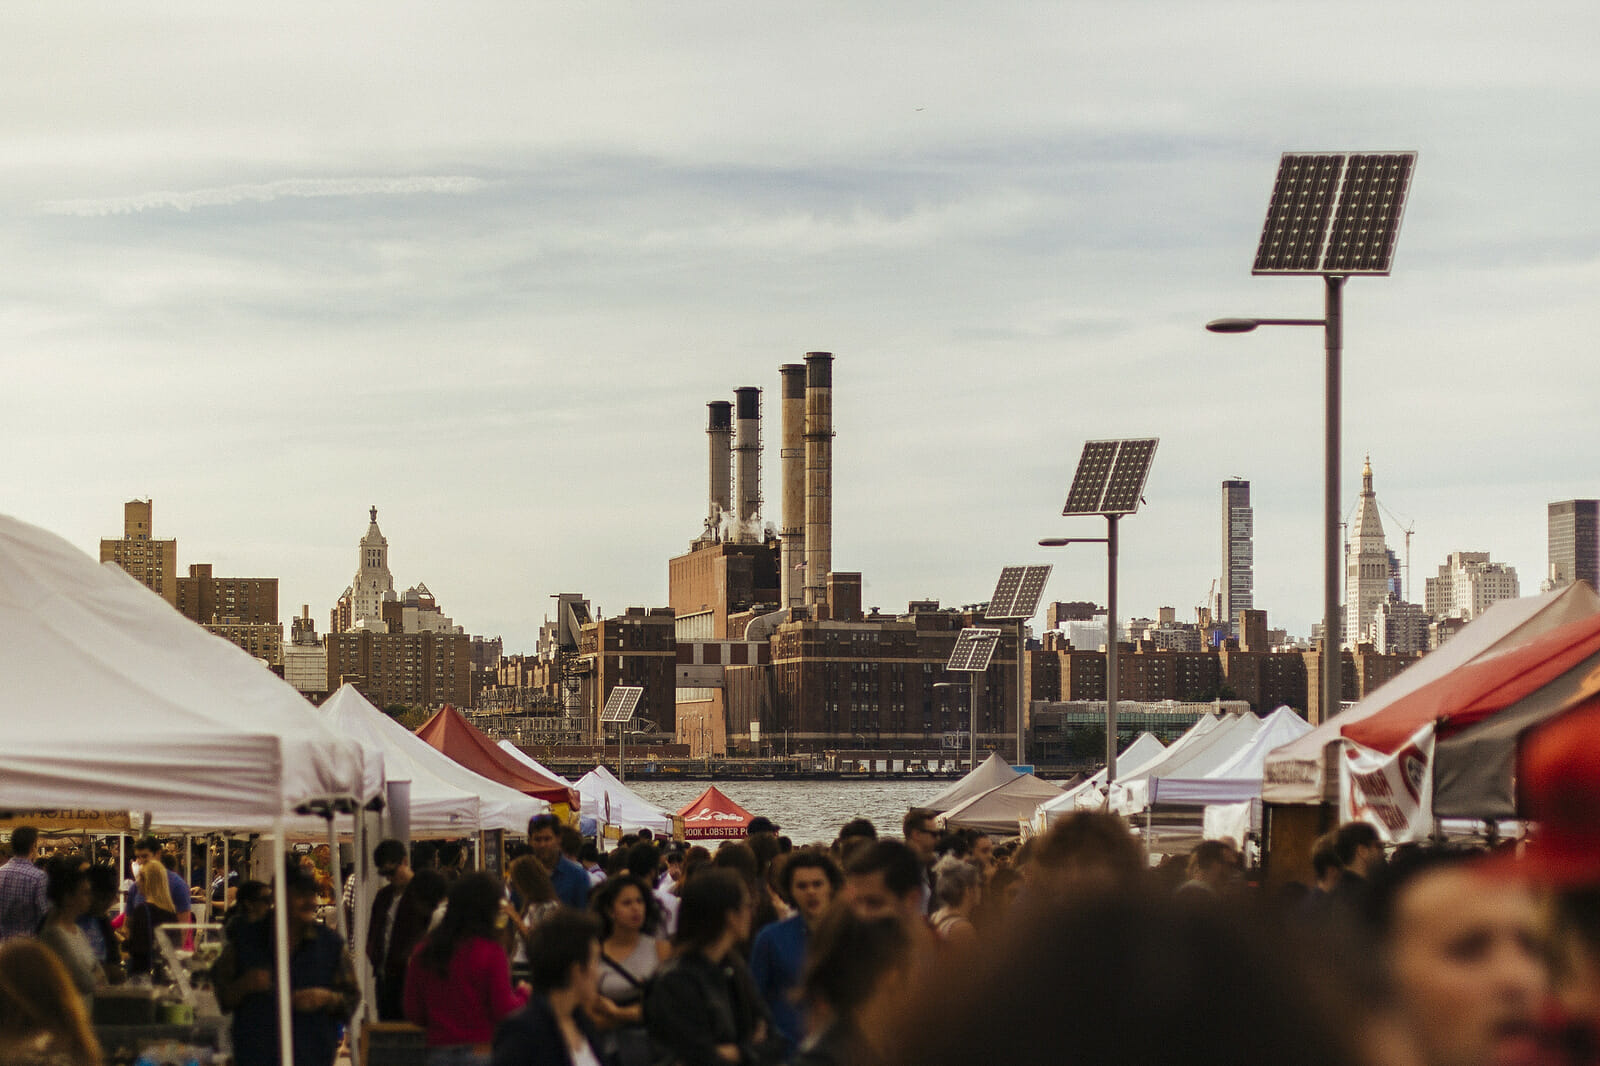 smorgasburg in brooklyn: Our Guide To Where To Eat Outdoors in NYC